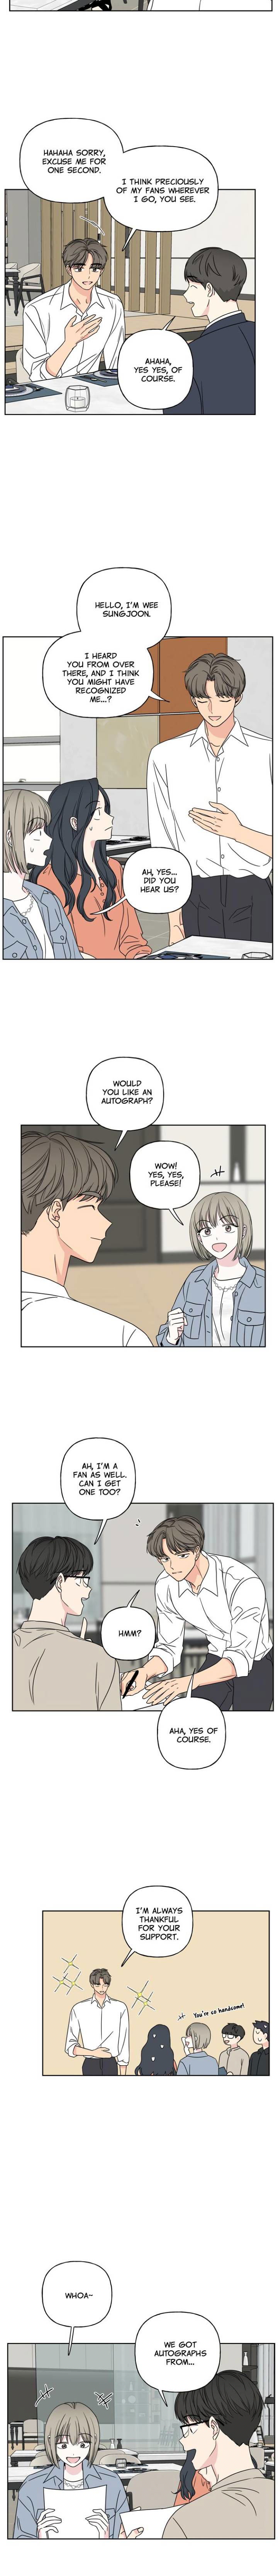 mother-im-sorry-chap-23-8